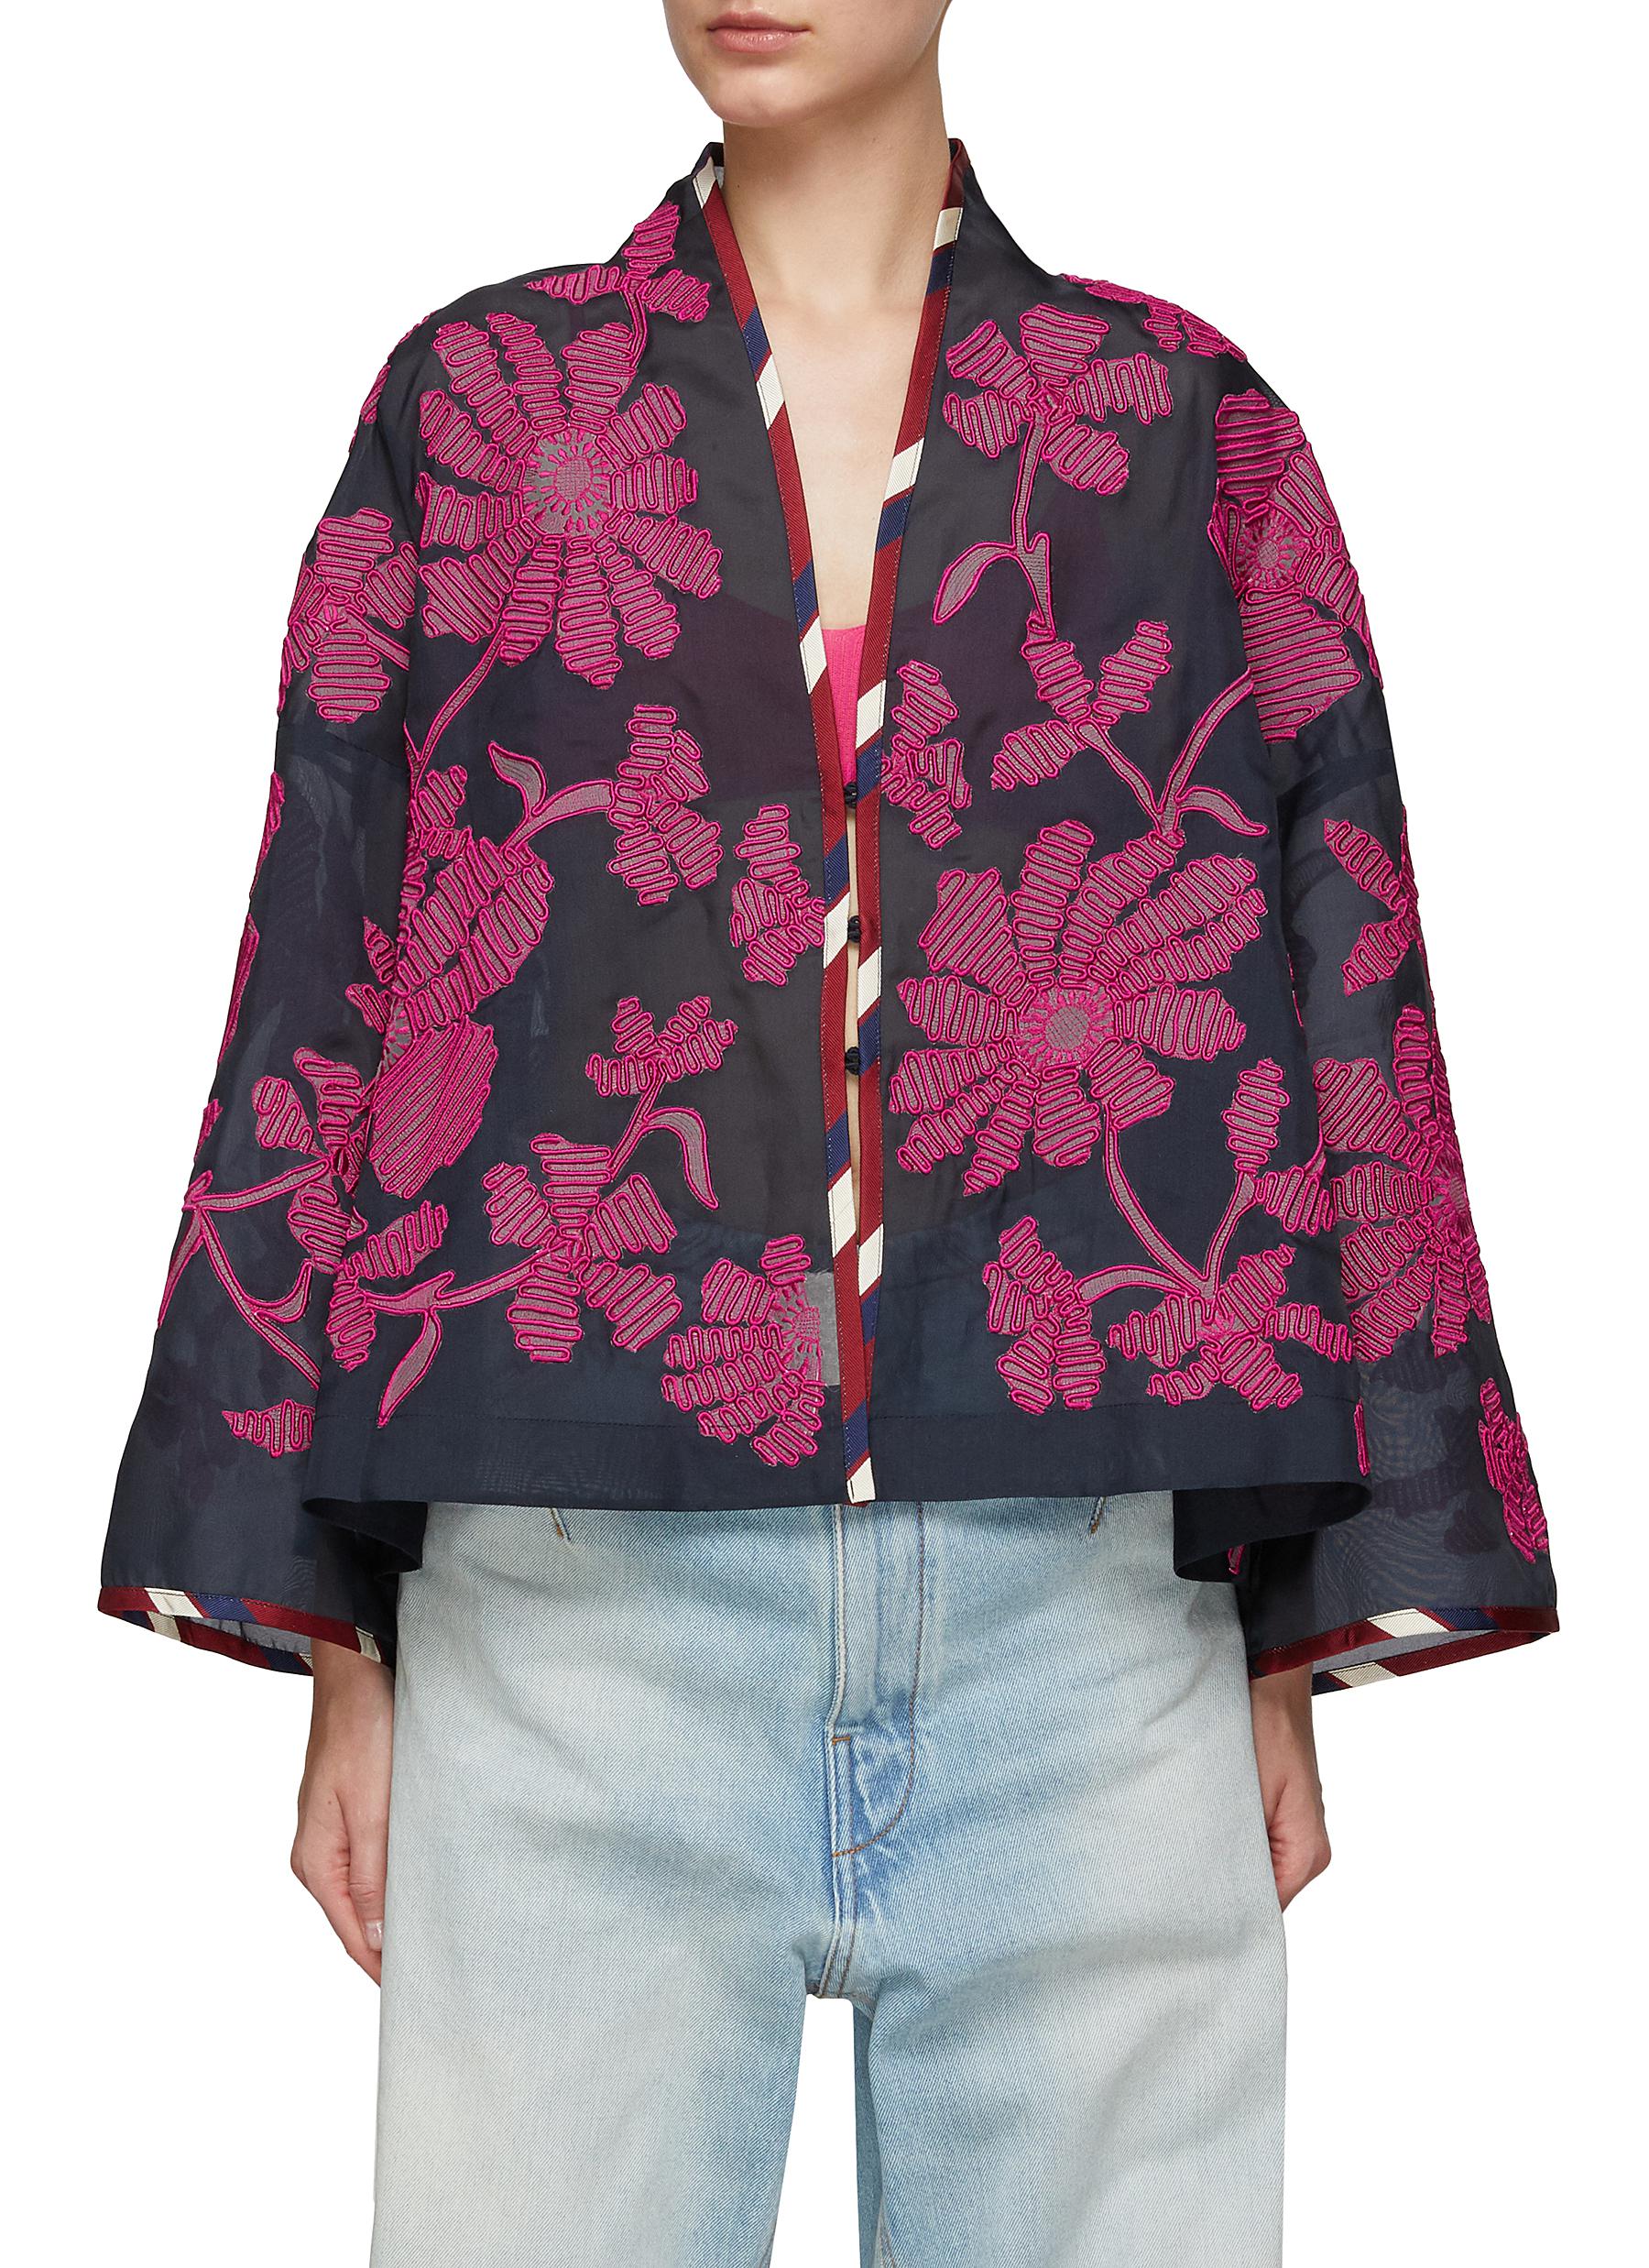 BIYAN Floral Embroidery Open Front Jacket